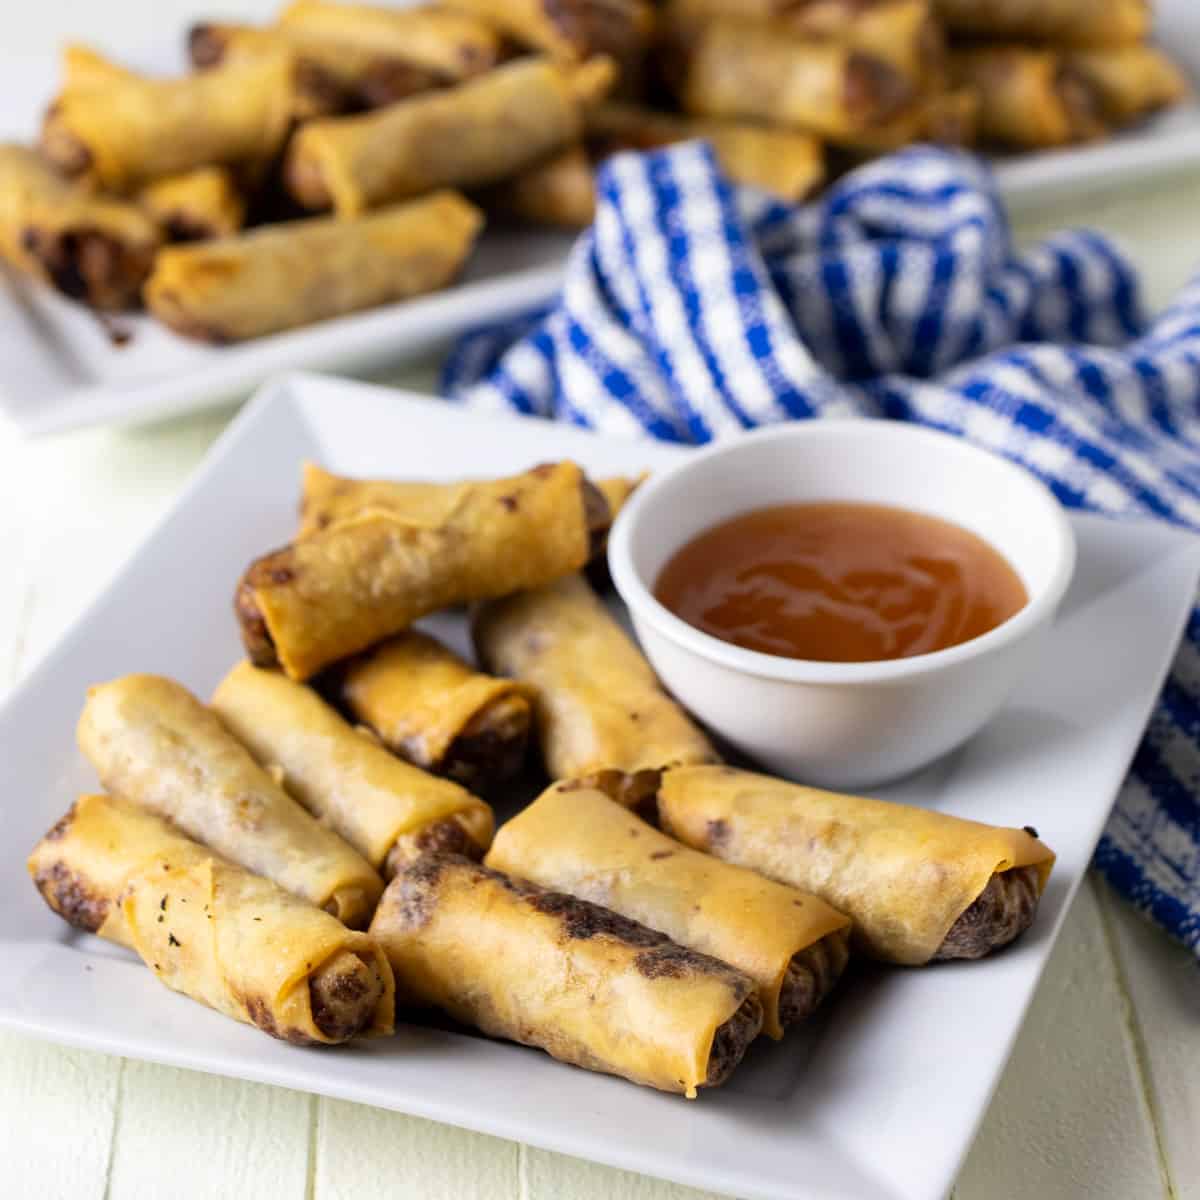 Lumpia on a plate with dipping sauce.